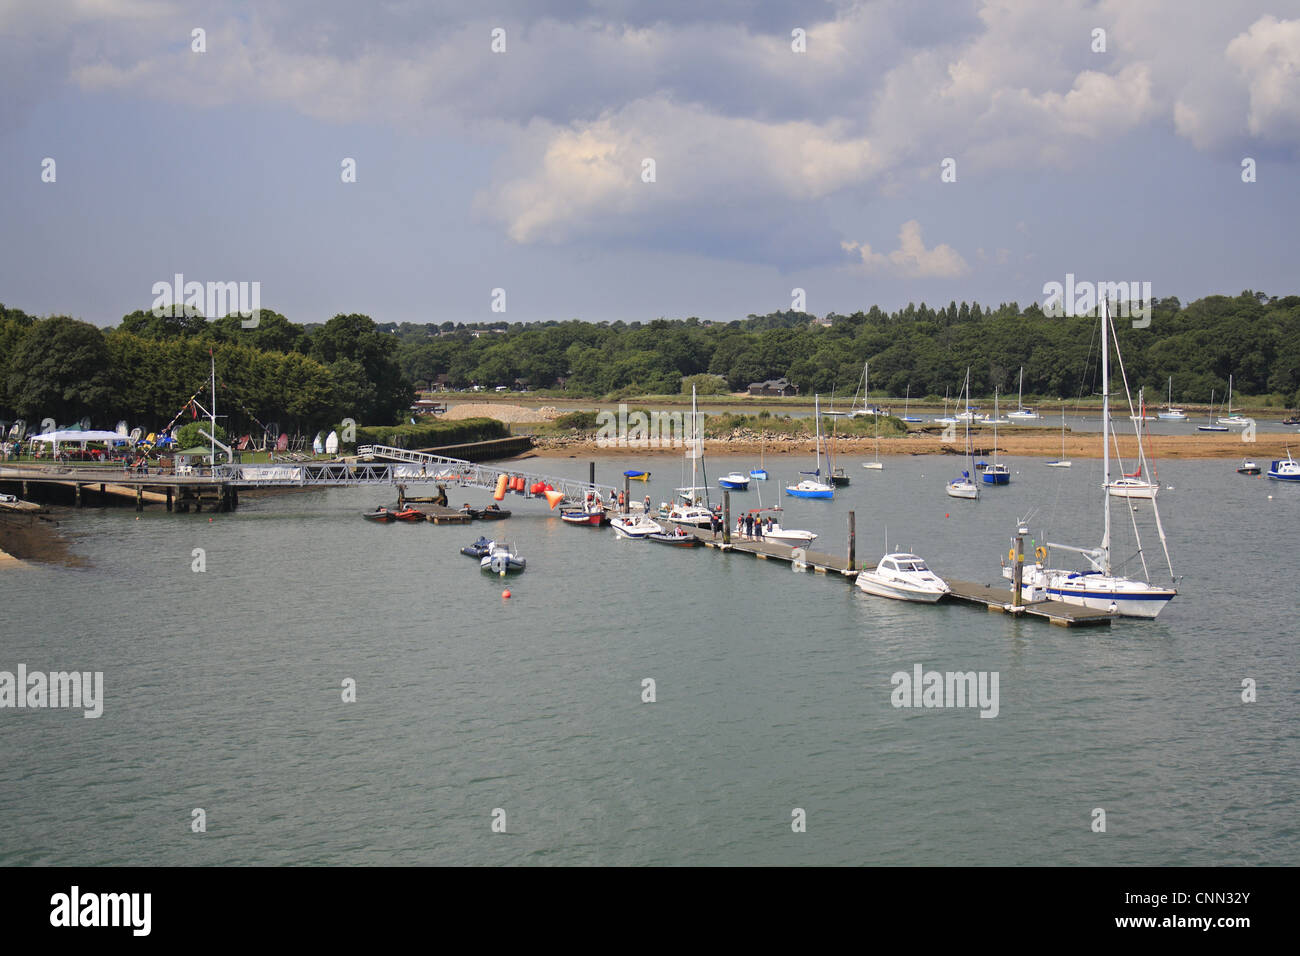 Boats at mooring in harbour, Wootton Creek, Fishbourne, Isle of Wight, England, july Stock Photo